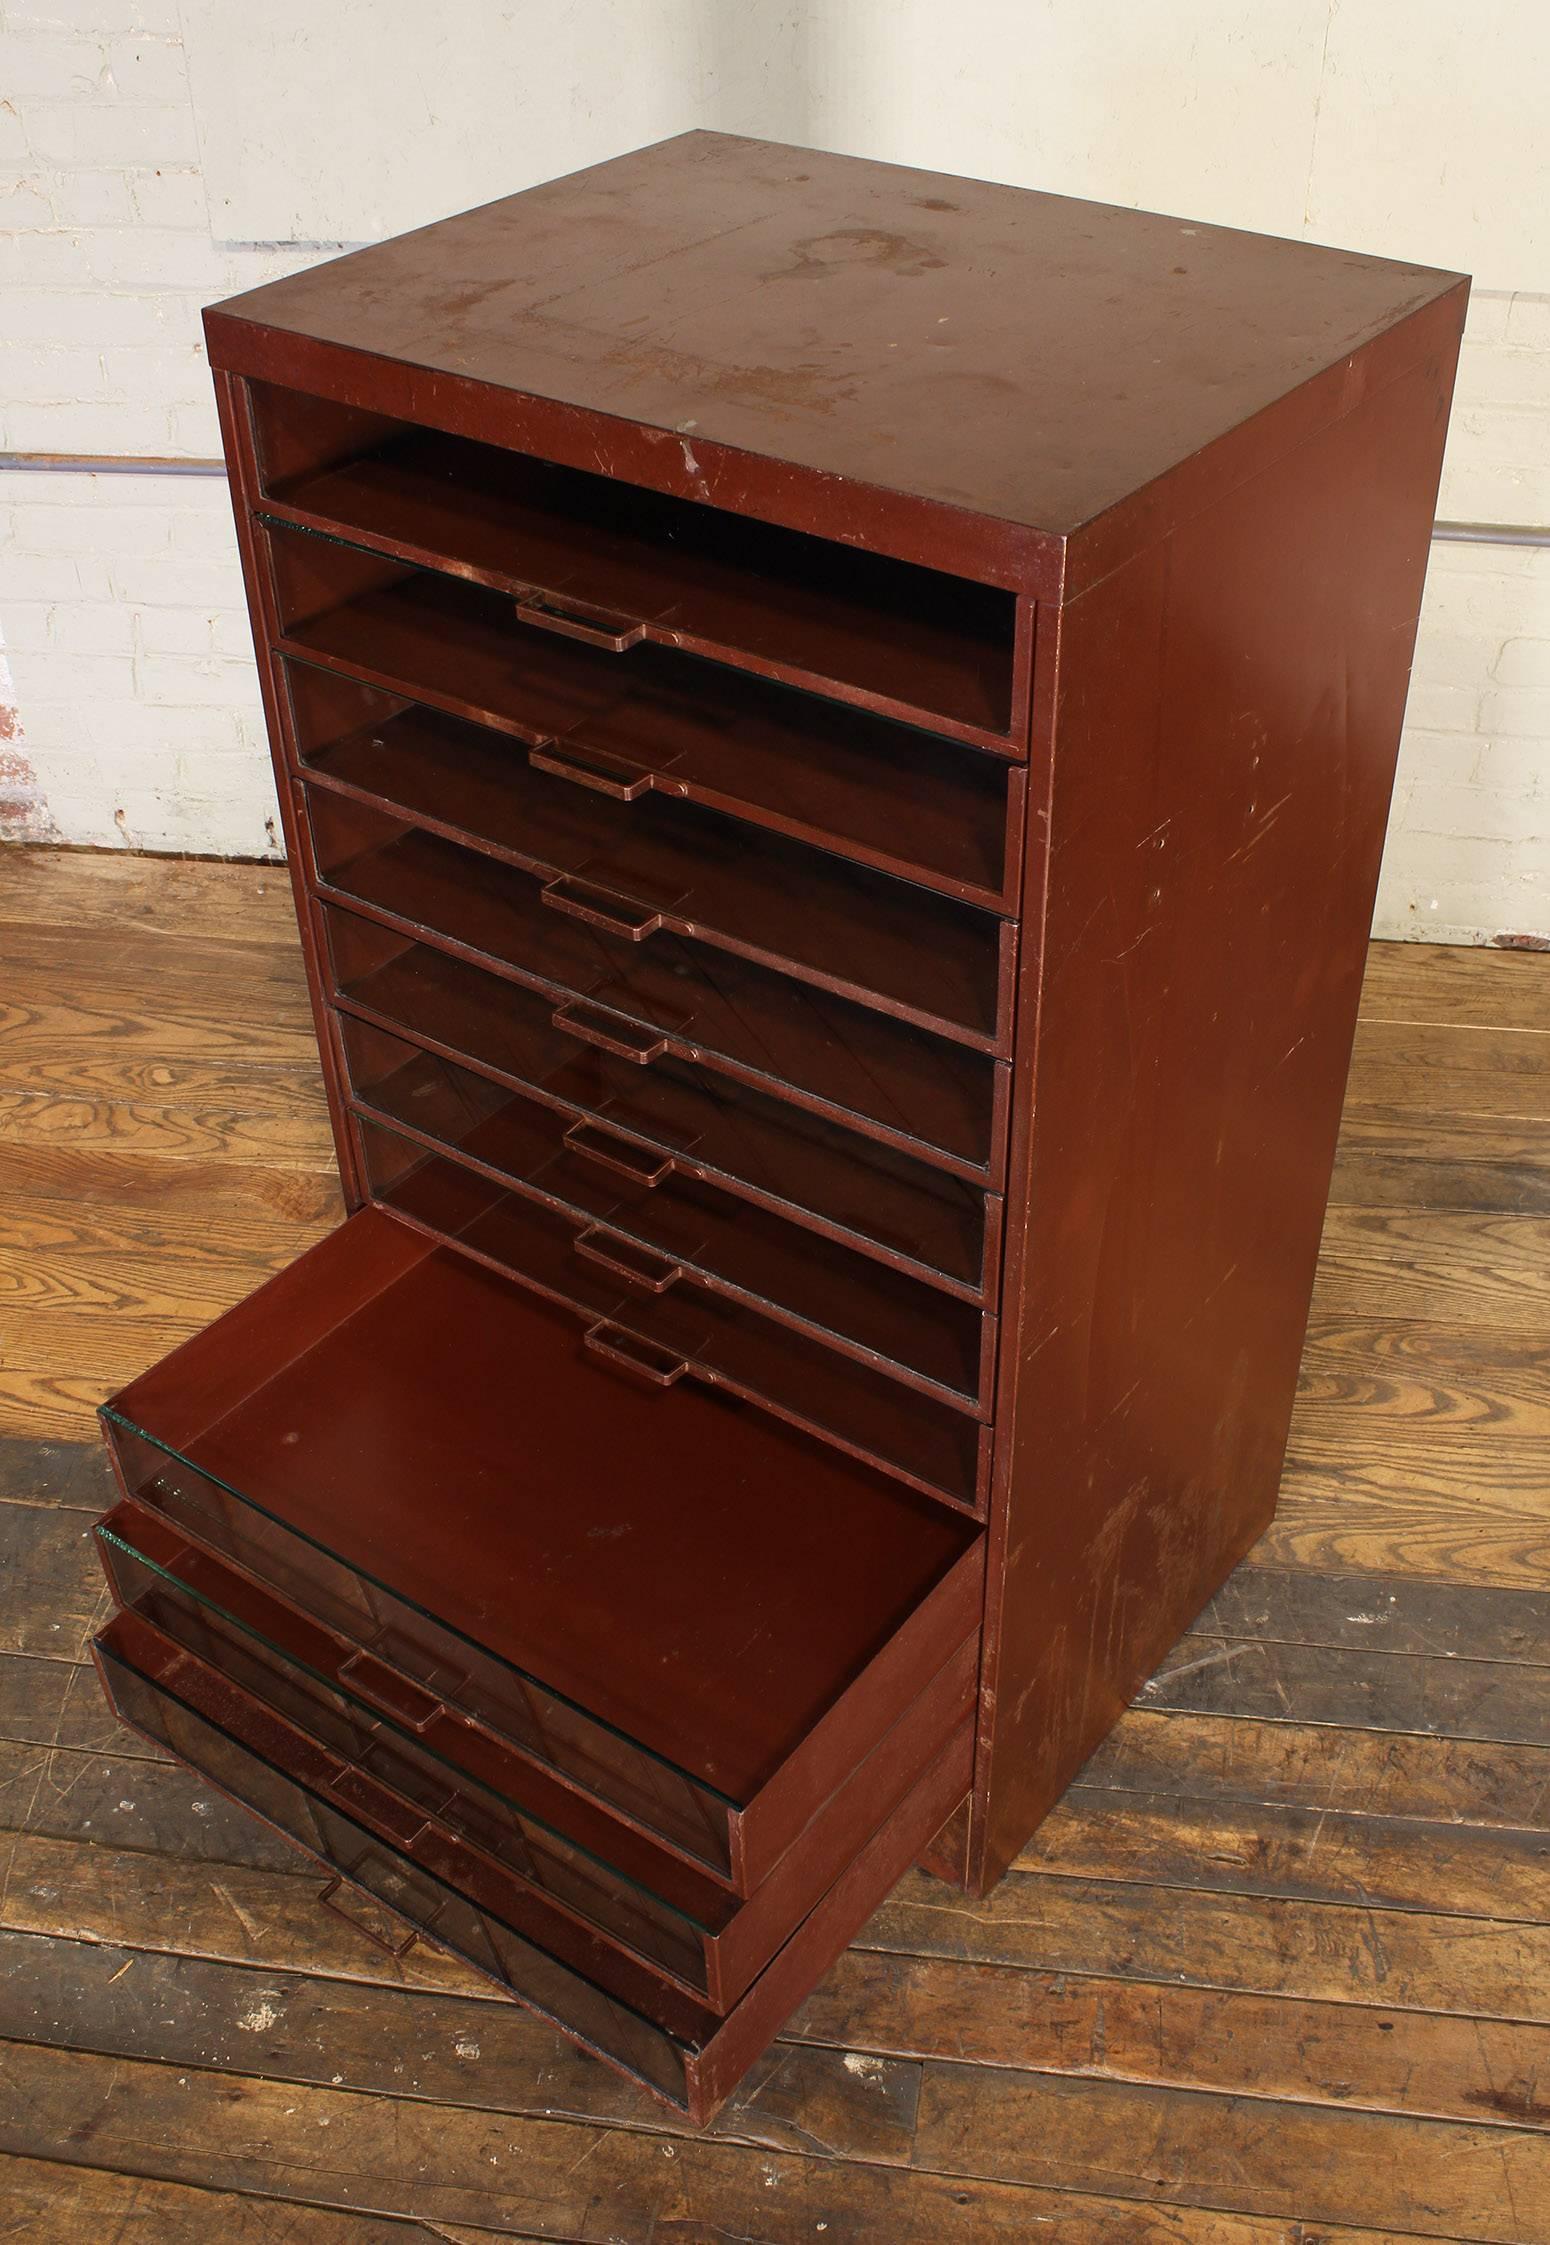 20th Century Vintage Industrial Metal Storage Cabinet with Glass Drawers